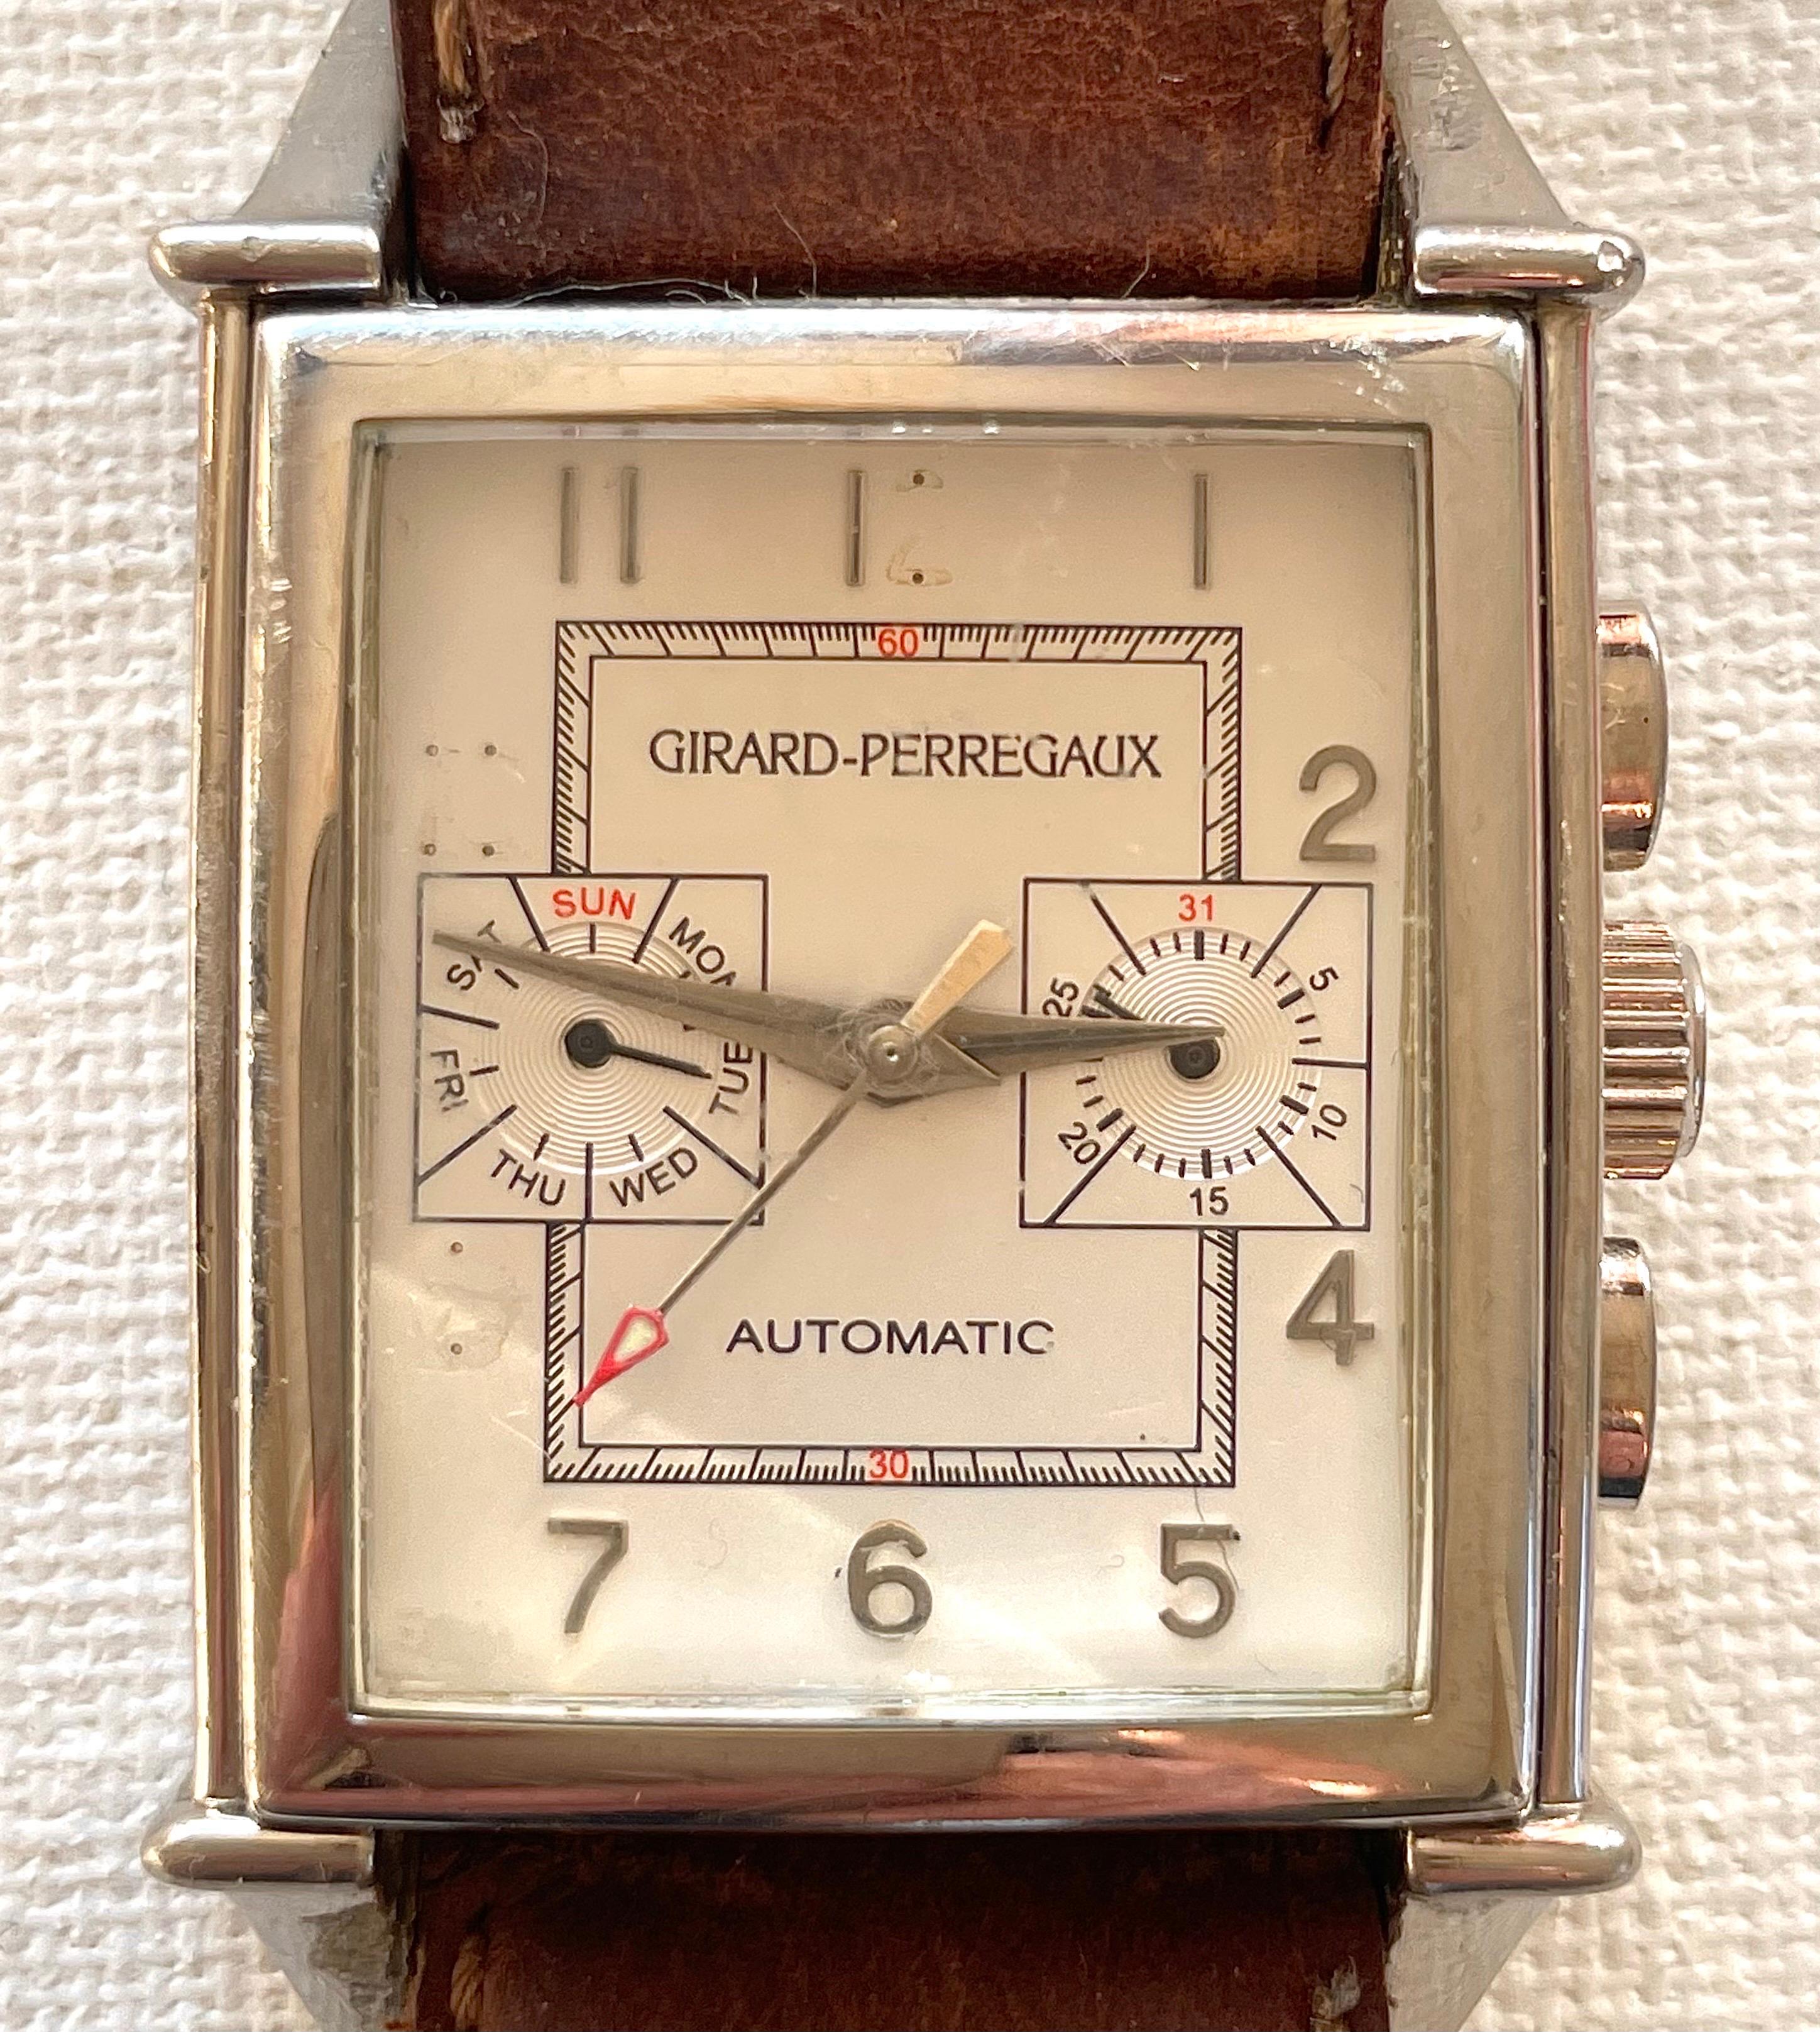 Swiss Girard-Perregaux Time-Date Chronograph Automatic Wrist Watch Vintage, 1999 For Sale